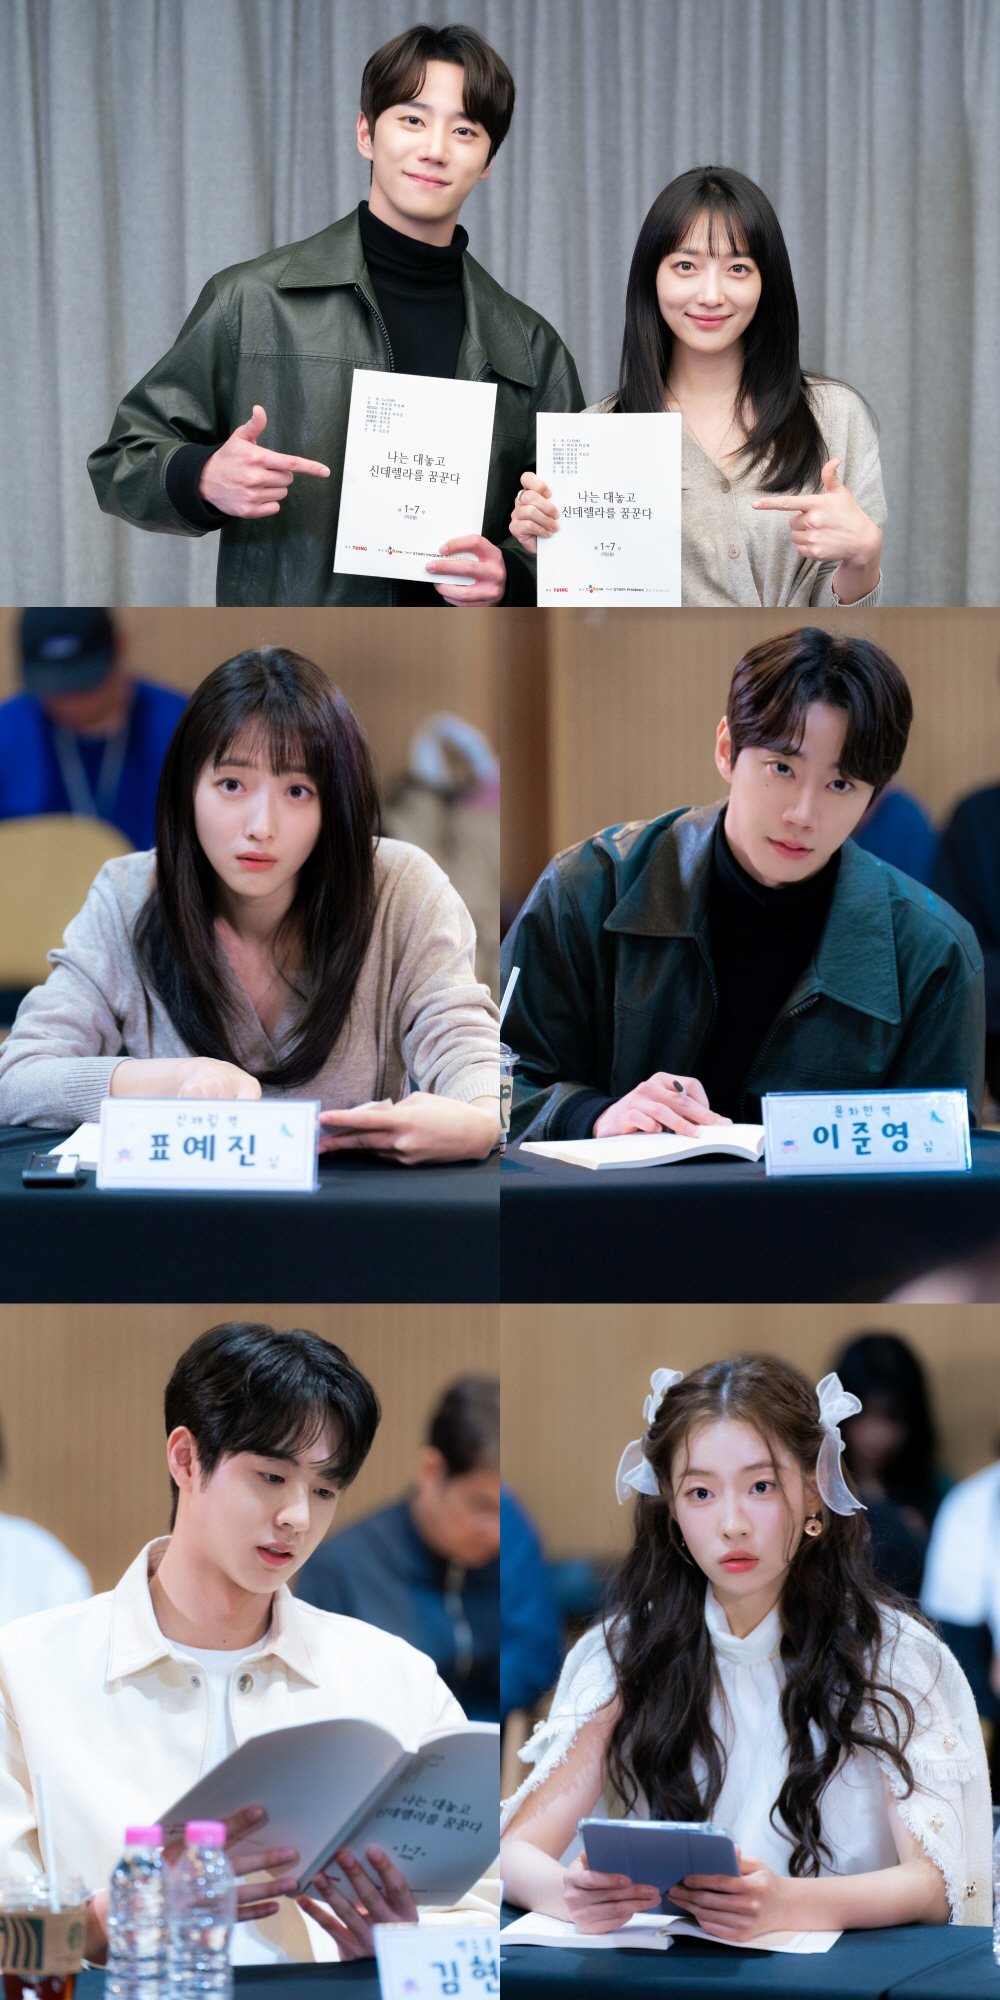 Pyo Ye Jin, Lee Jun Young, And More Showcase Their Unique Charms At Script Reading For Upcoming Rom-Com